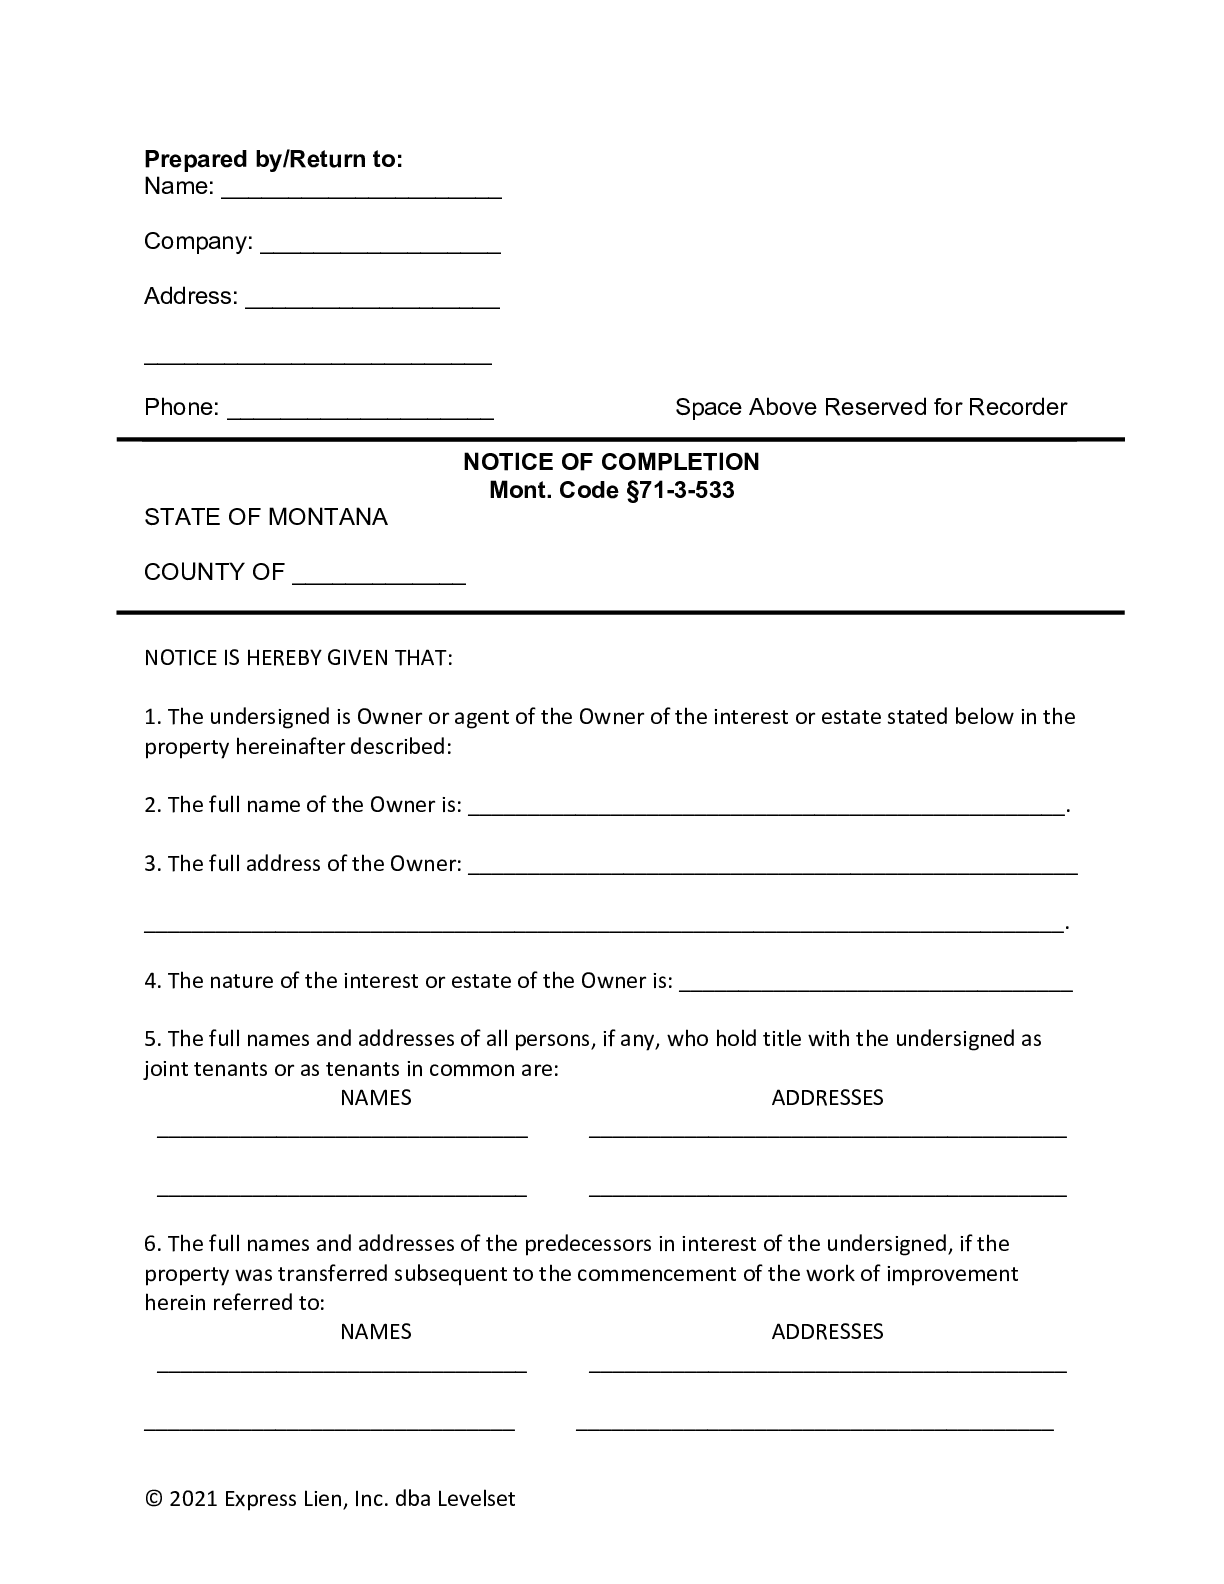 Montana Notice of Completion Form - free from